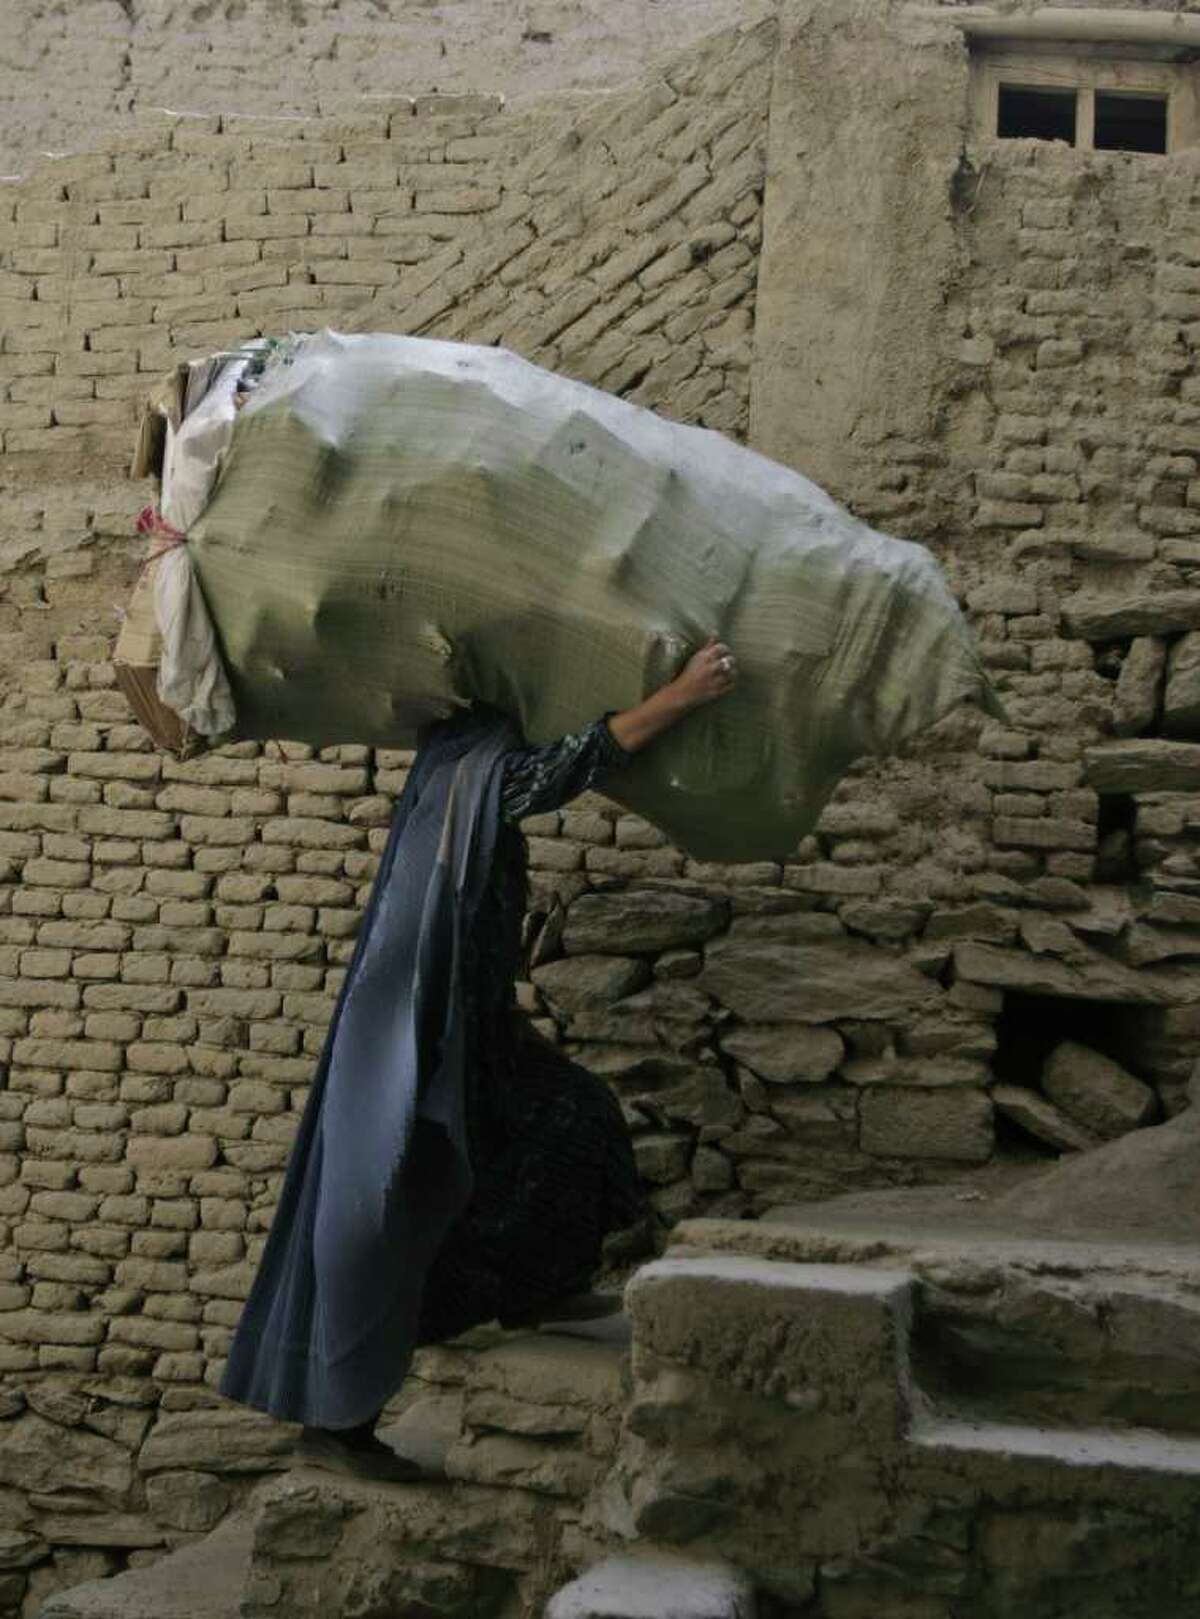 FILE- In this June 14, 2011 picture, an Afghan woman carries goods up the stairs in the old town of Kabul, Afghanistan. Afghanistan's President Karzai endorsed Tuesday March 6 2012 guidelines for women's conduct from the country's clerics' council that activists say represent a giant step backward for women's rights in Afghanistan. (AP Photo/Ahmad Jamshid, File)